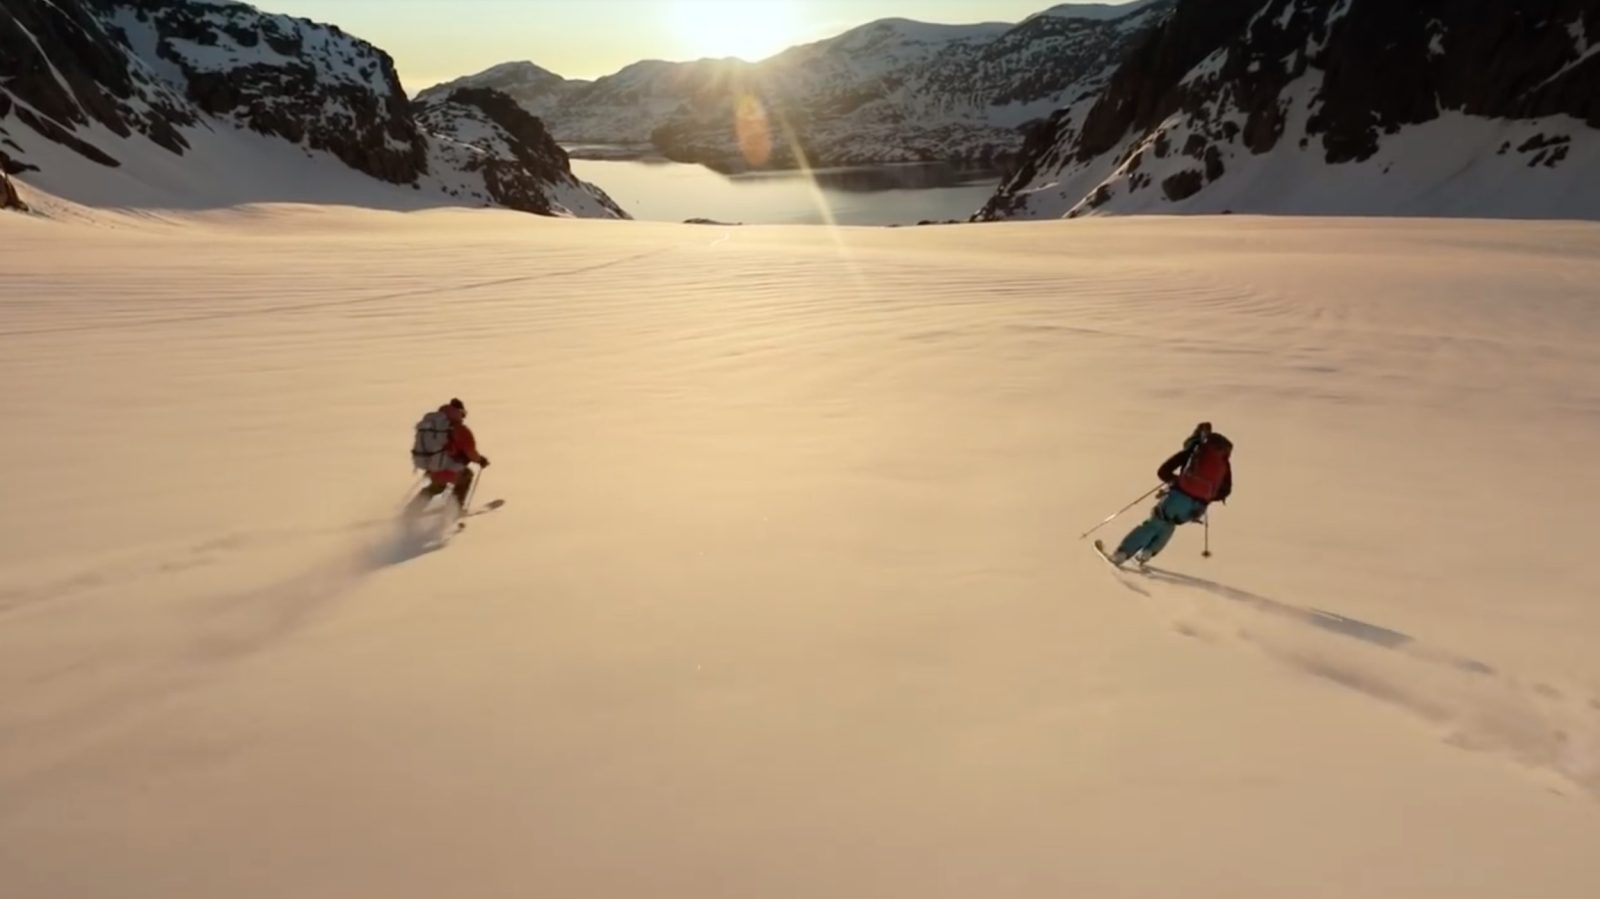 DJI's video of the Greenland expedition and the new remote controller